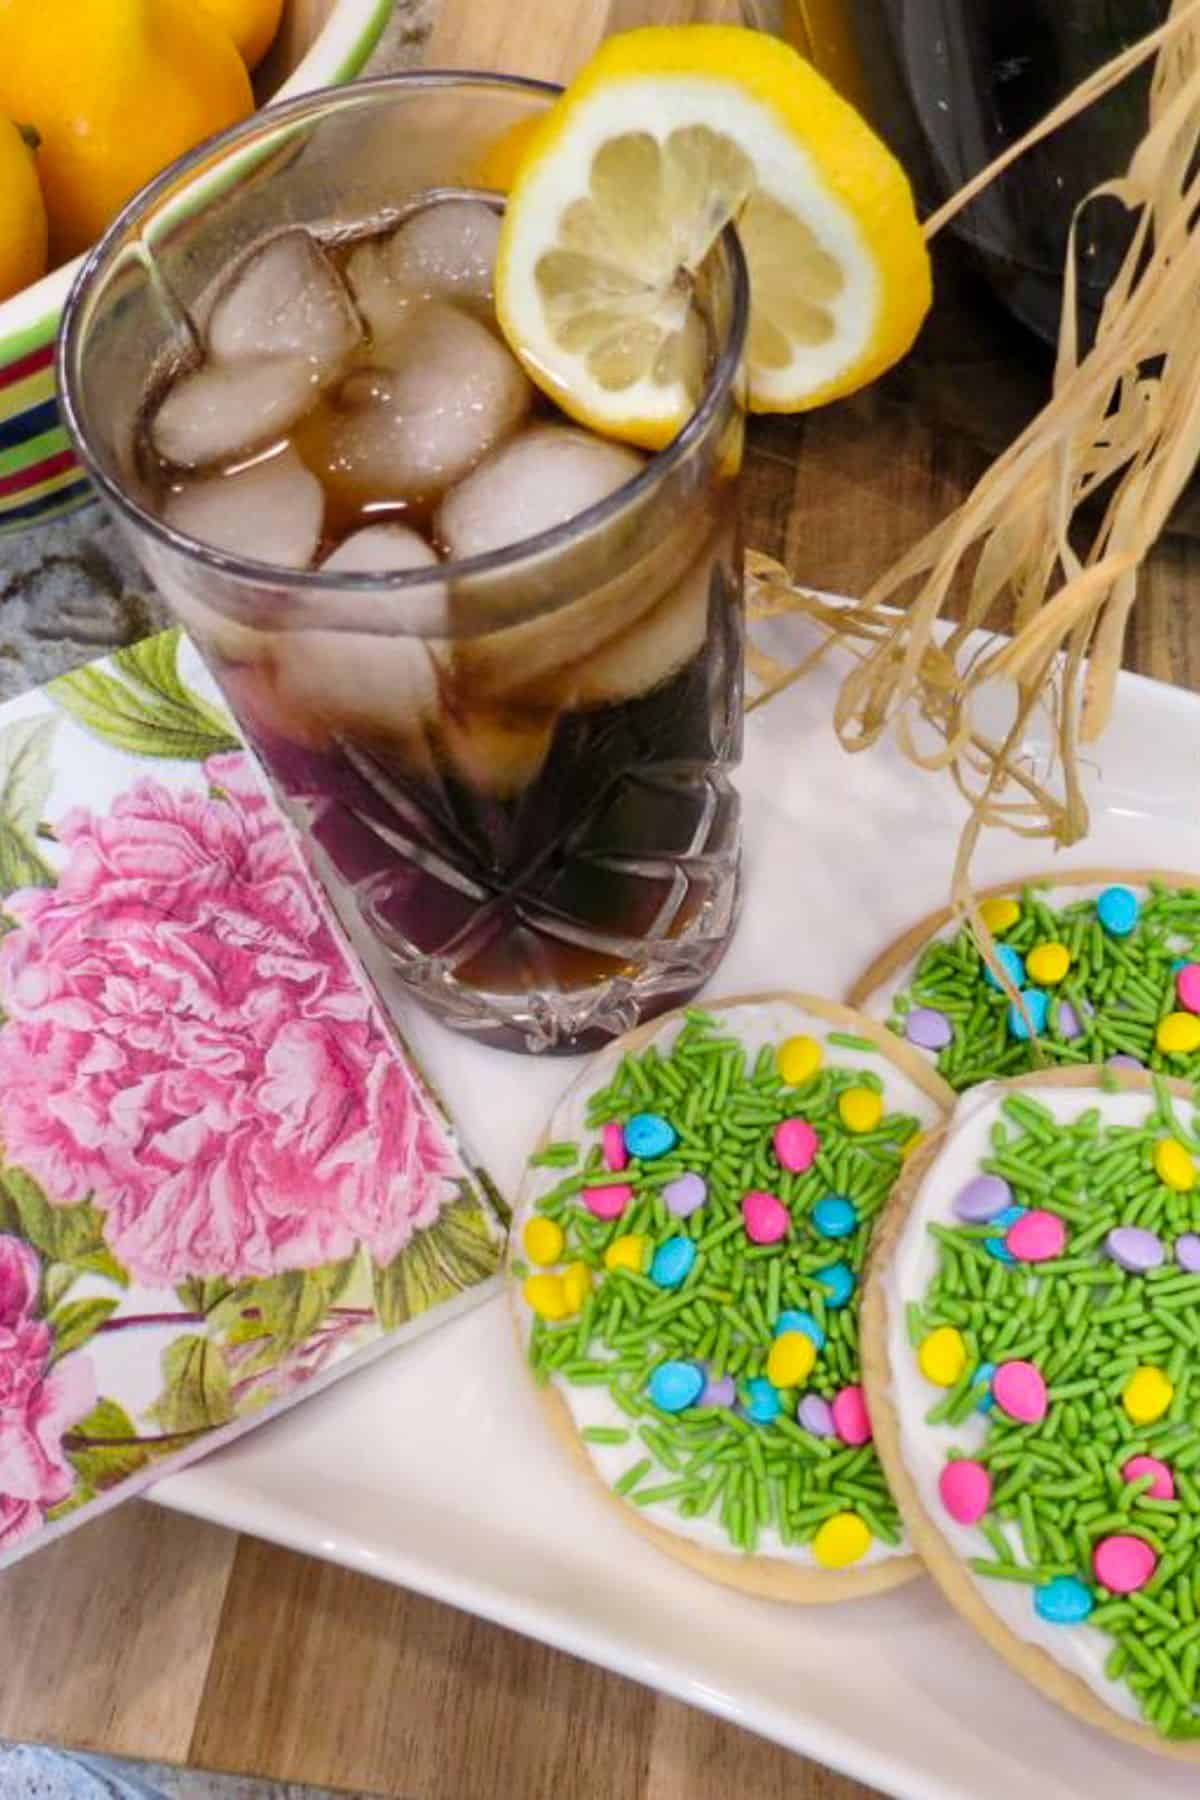 A clear glass of a dark liquid an ice with a lemon slice on the rim. next to Easter egg cookies.